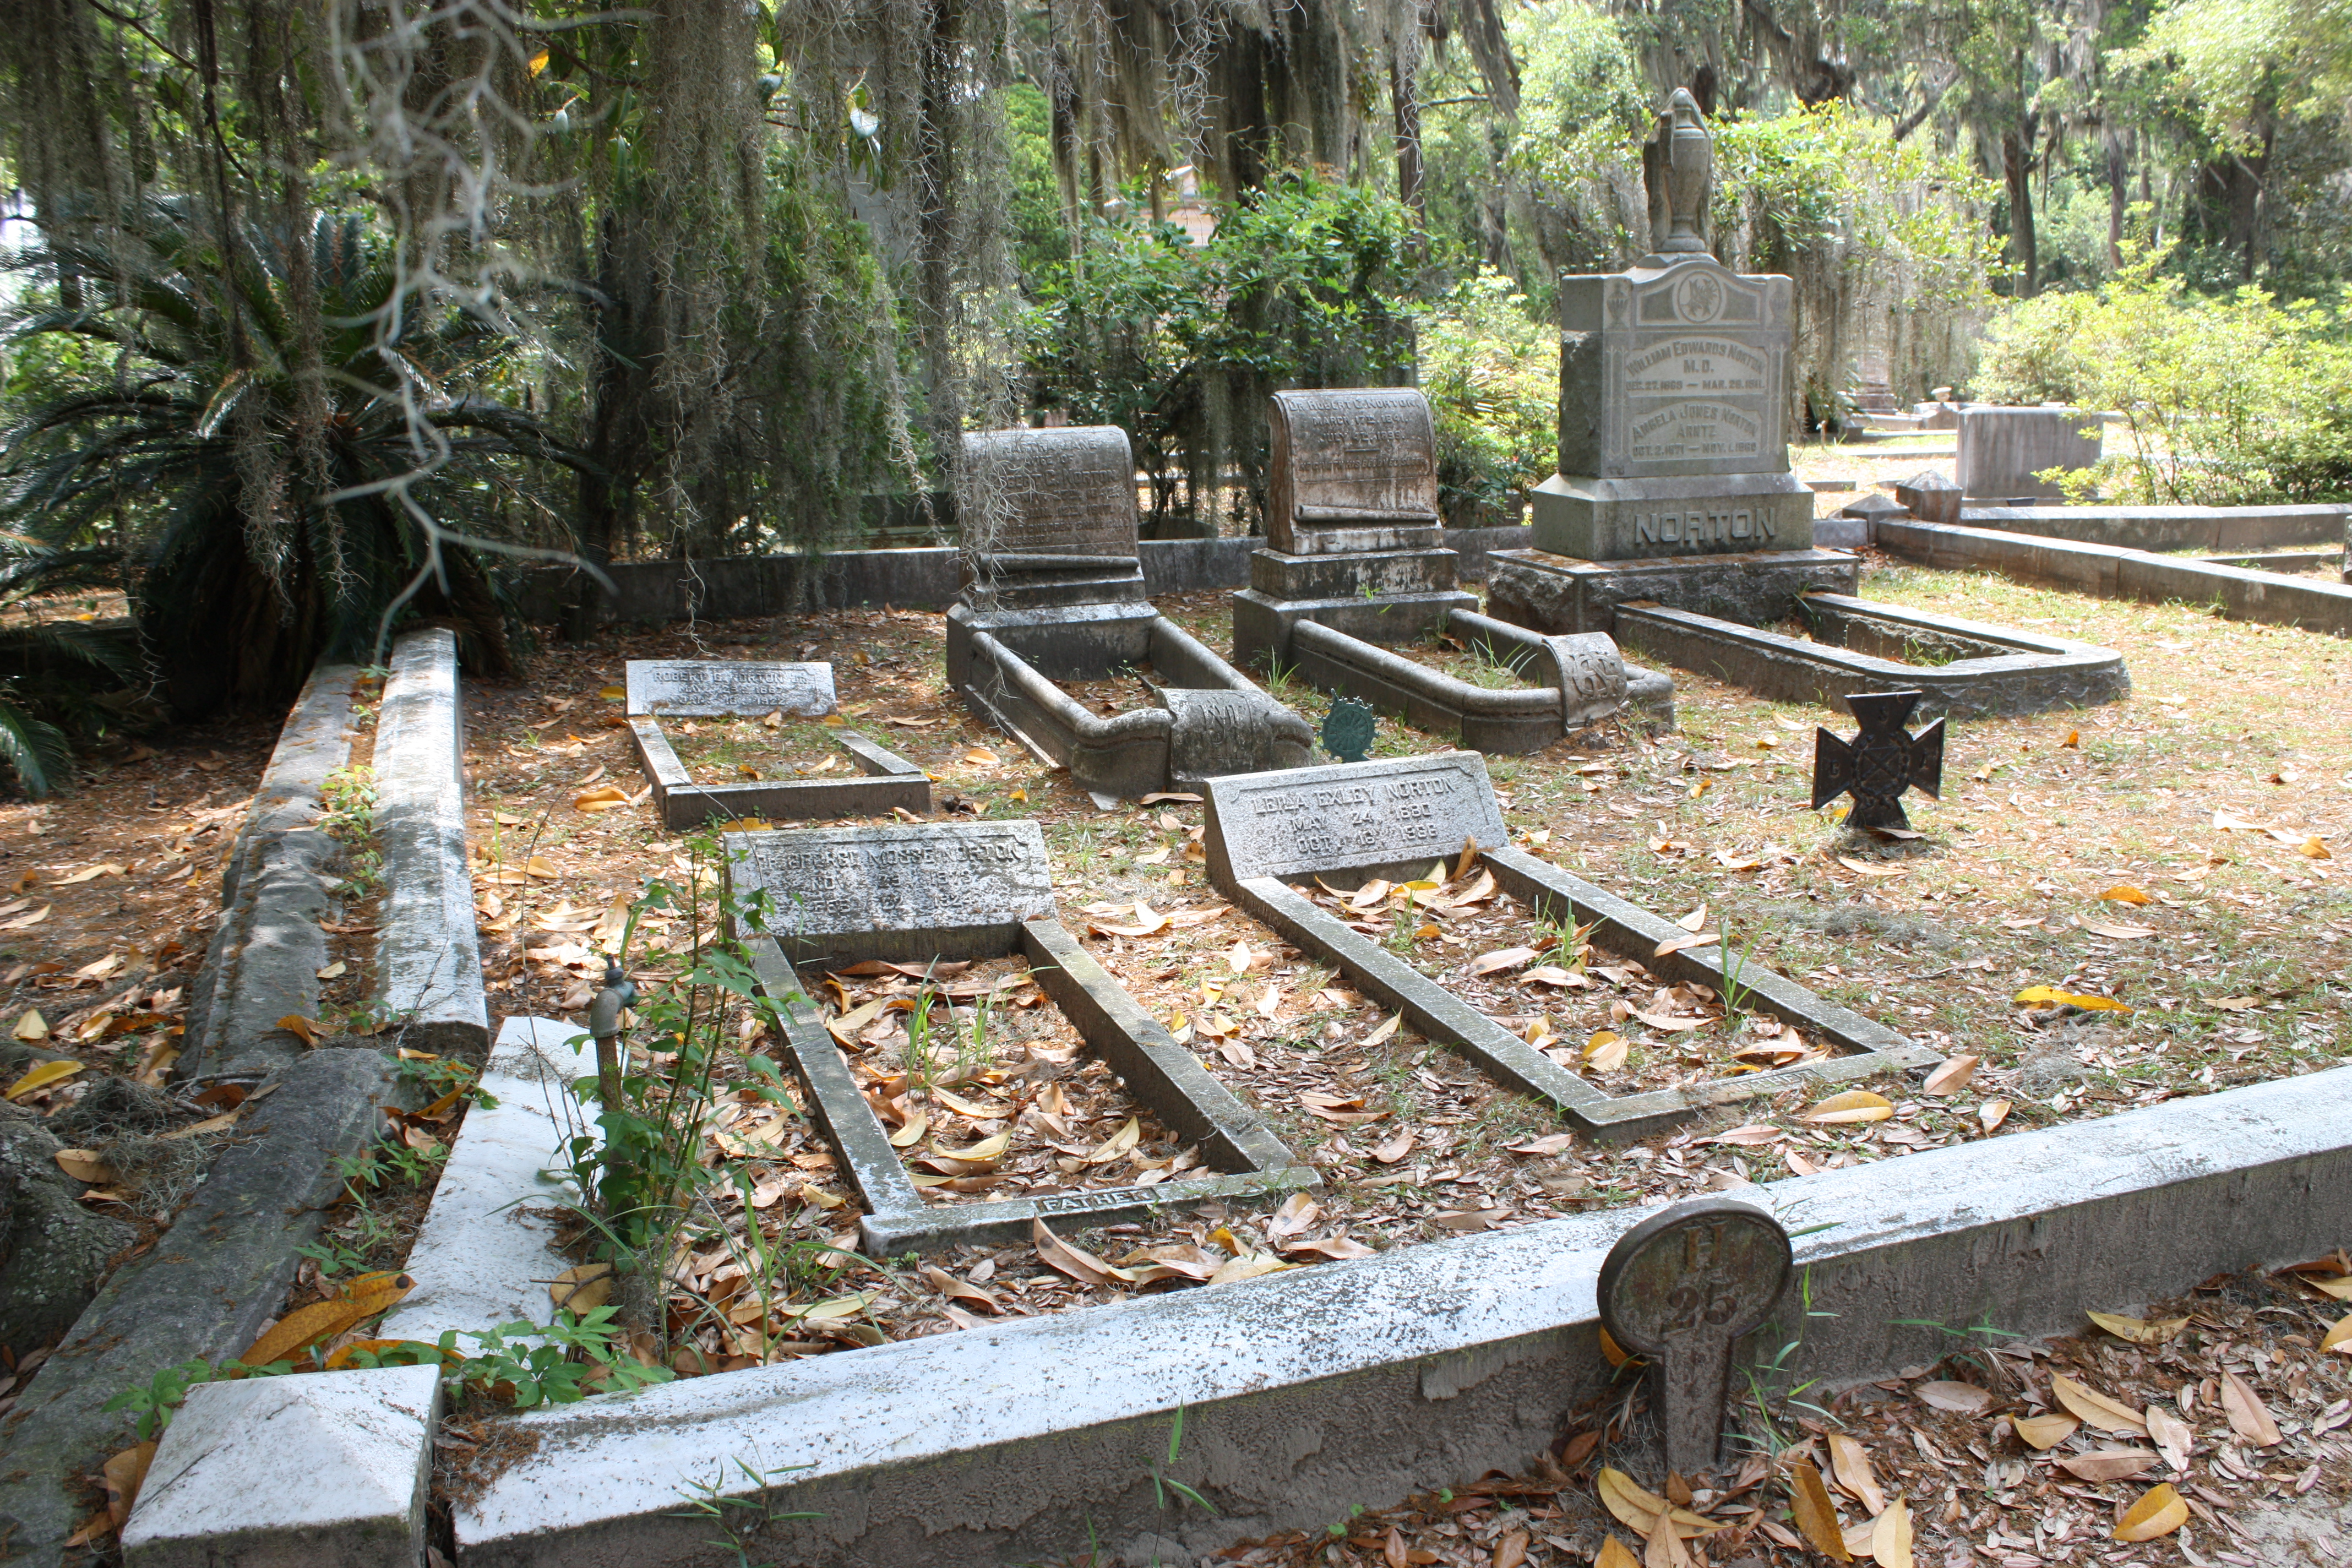 The Norton Family Plot in the Bonaventure cemetery.  Among those buried here are Robert Godfrey Norton (1841-1899), his wife Martha Jane Edwards, Robert's son George Mosse Norton and George's wife Leila Walton Exley.